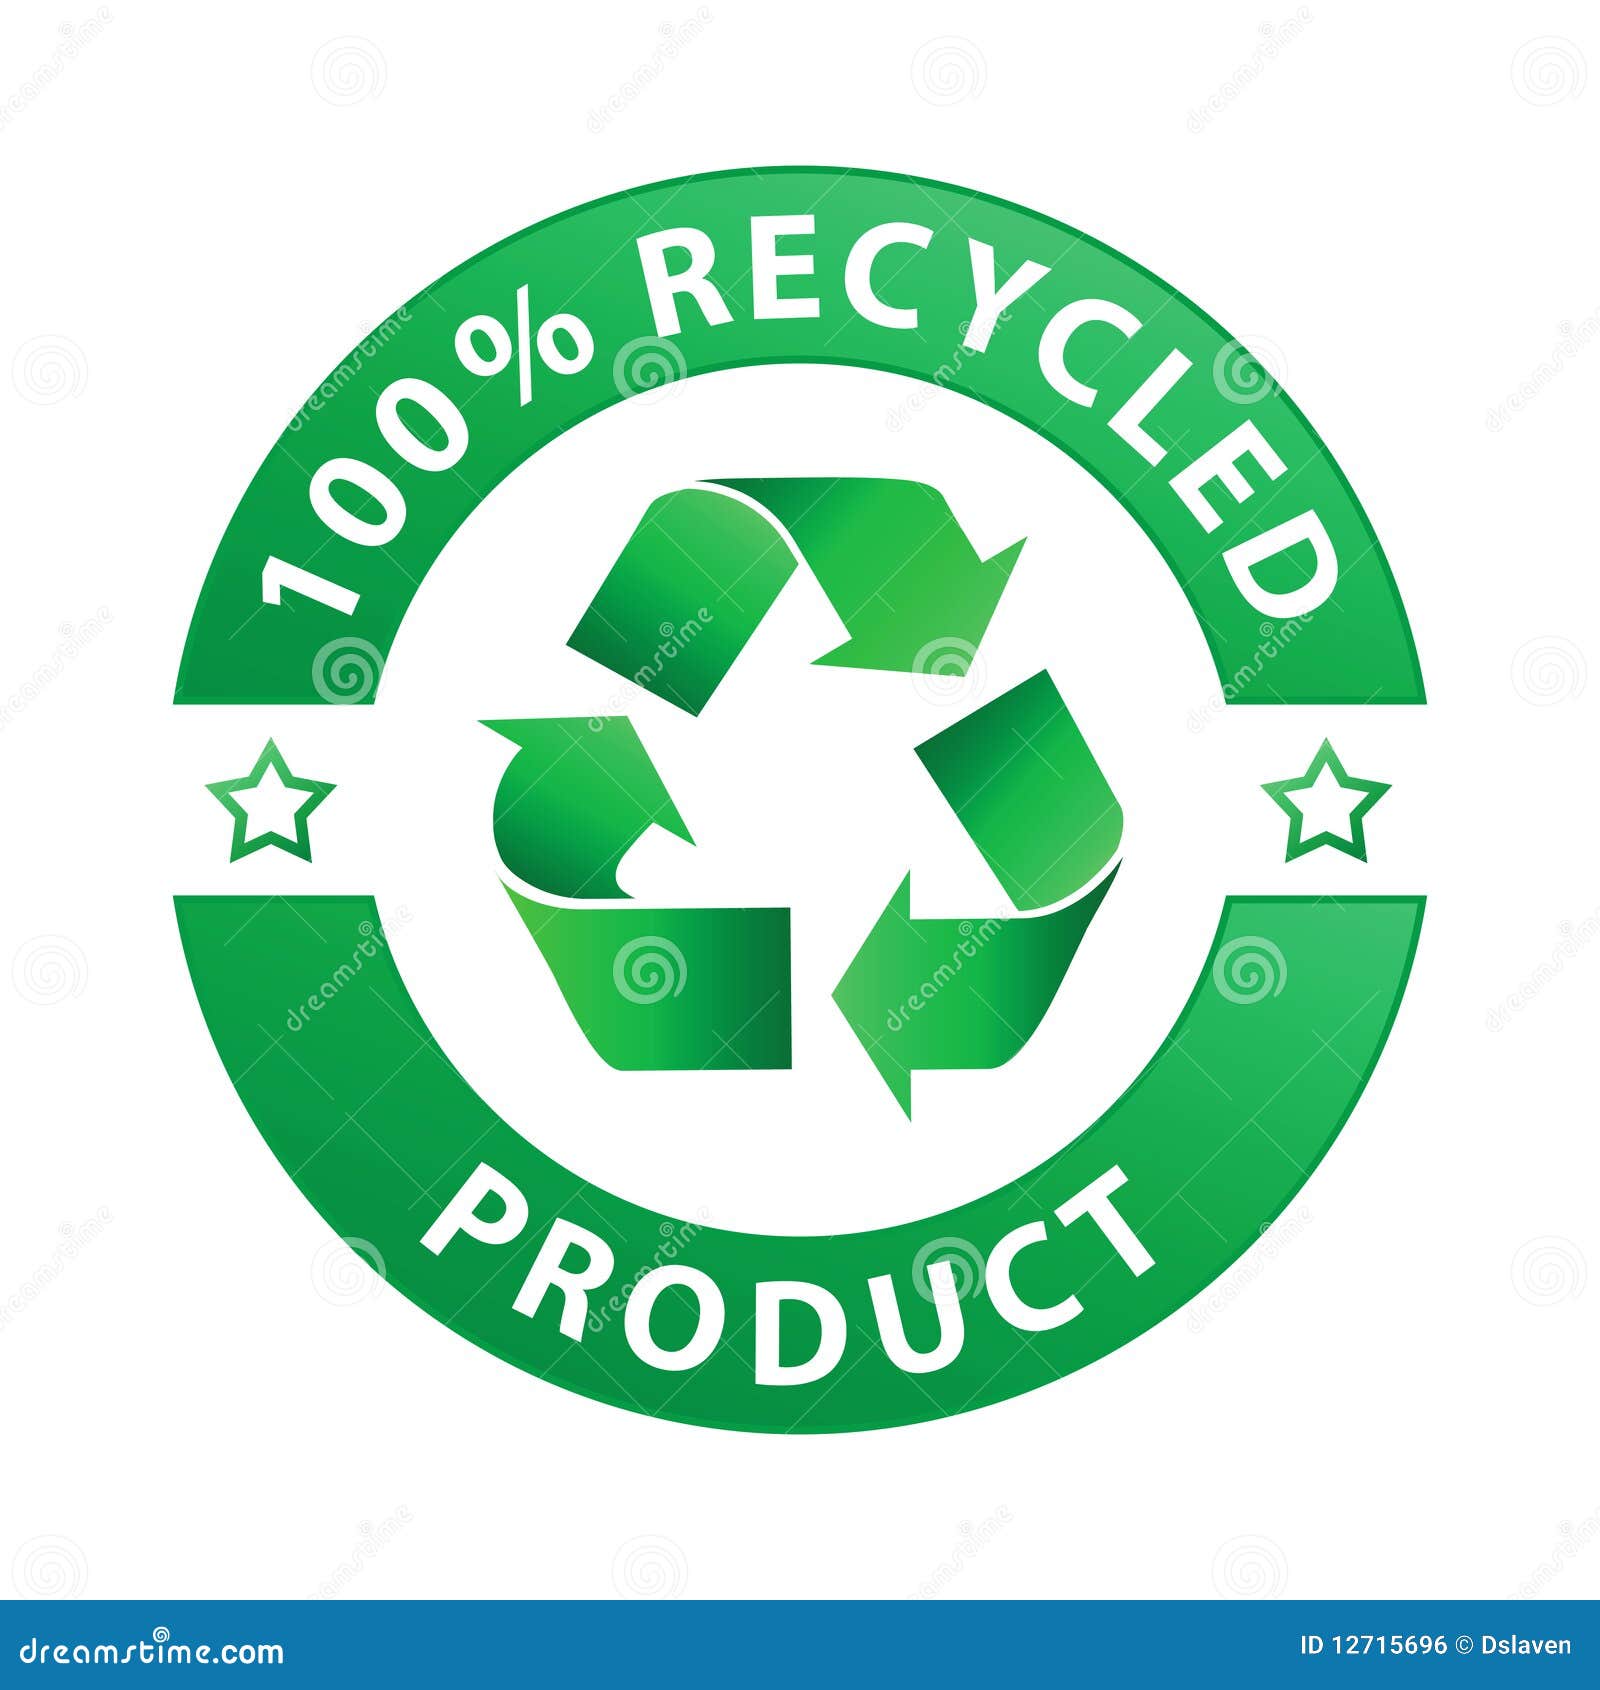 100% recycled product label ()